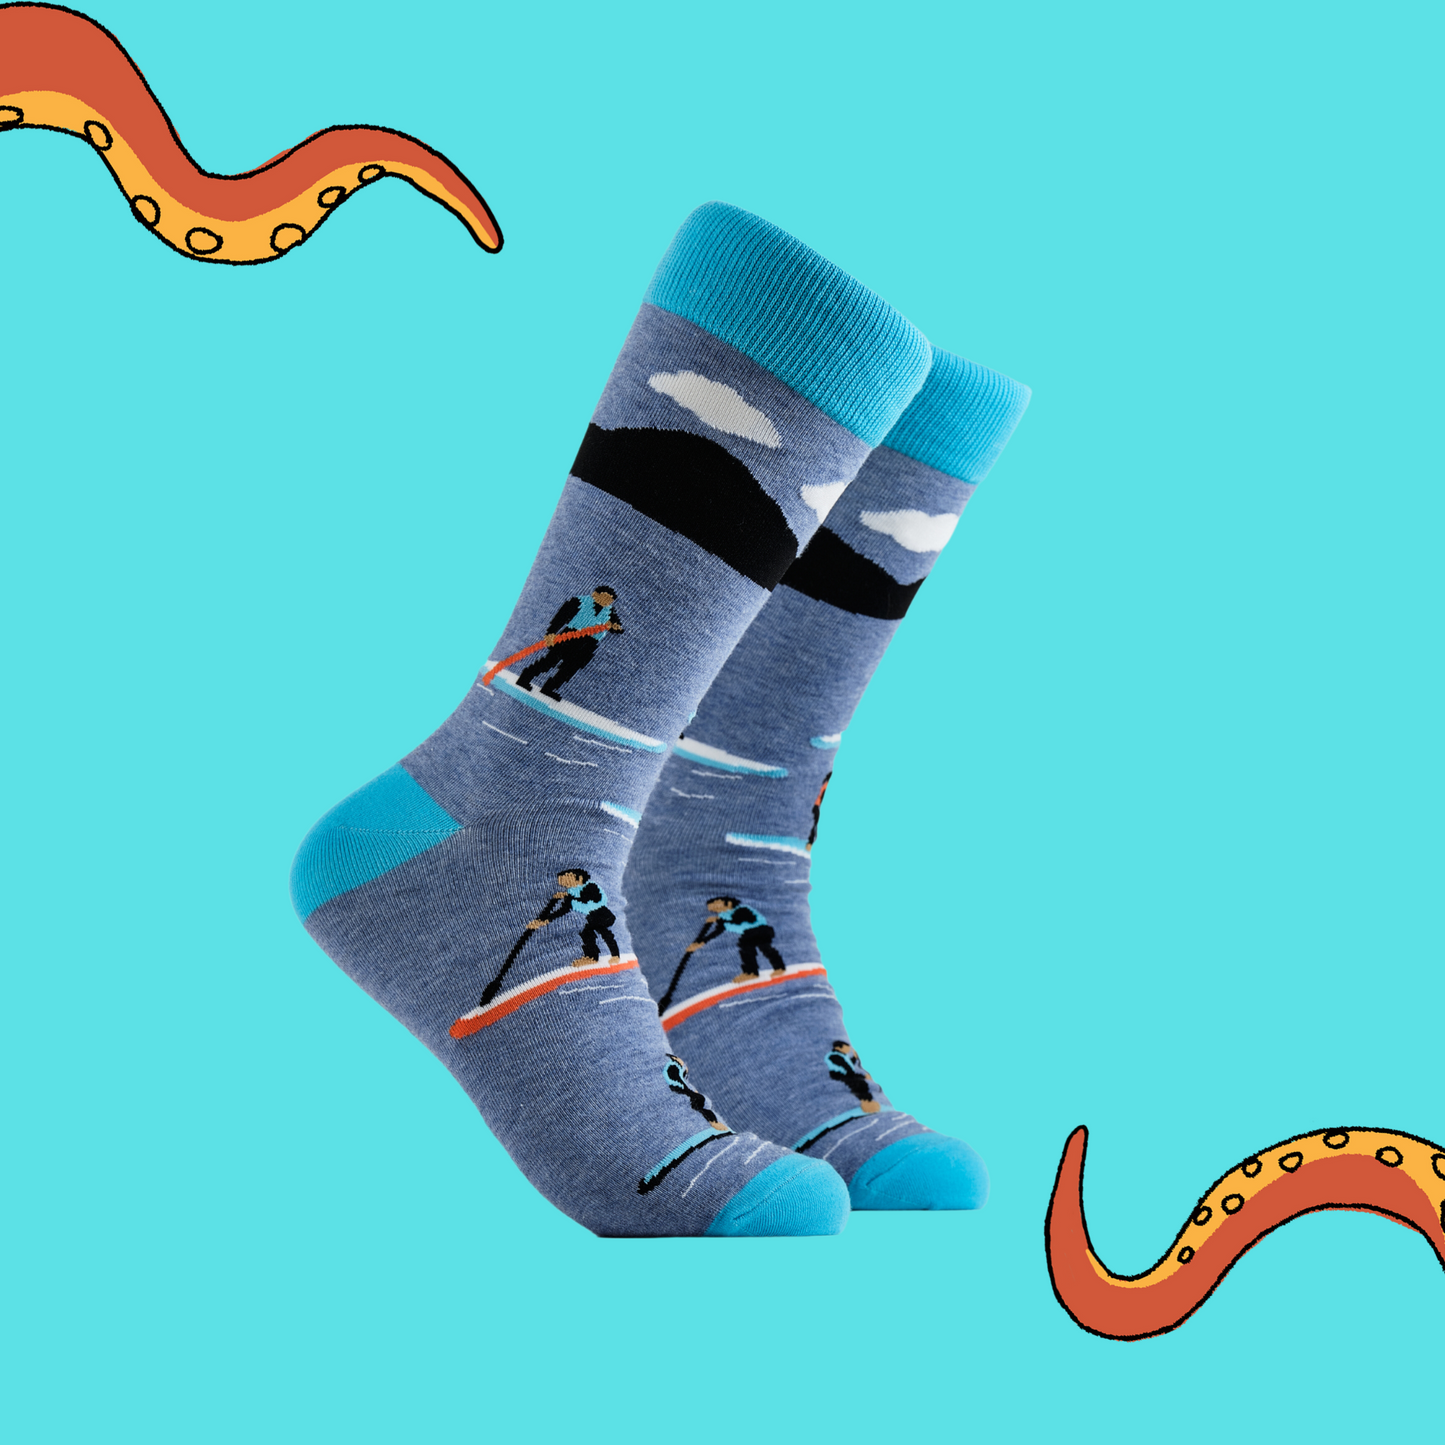 A pair of socks depicting paddle boarding. Blue legs, bright blue cuff, heel and toe.